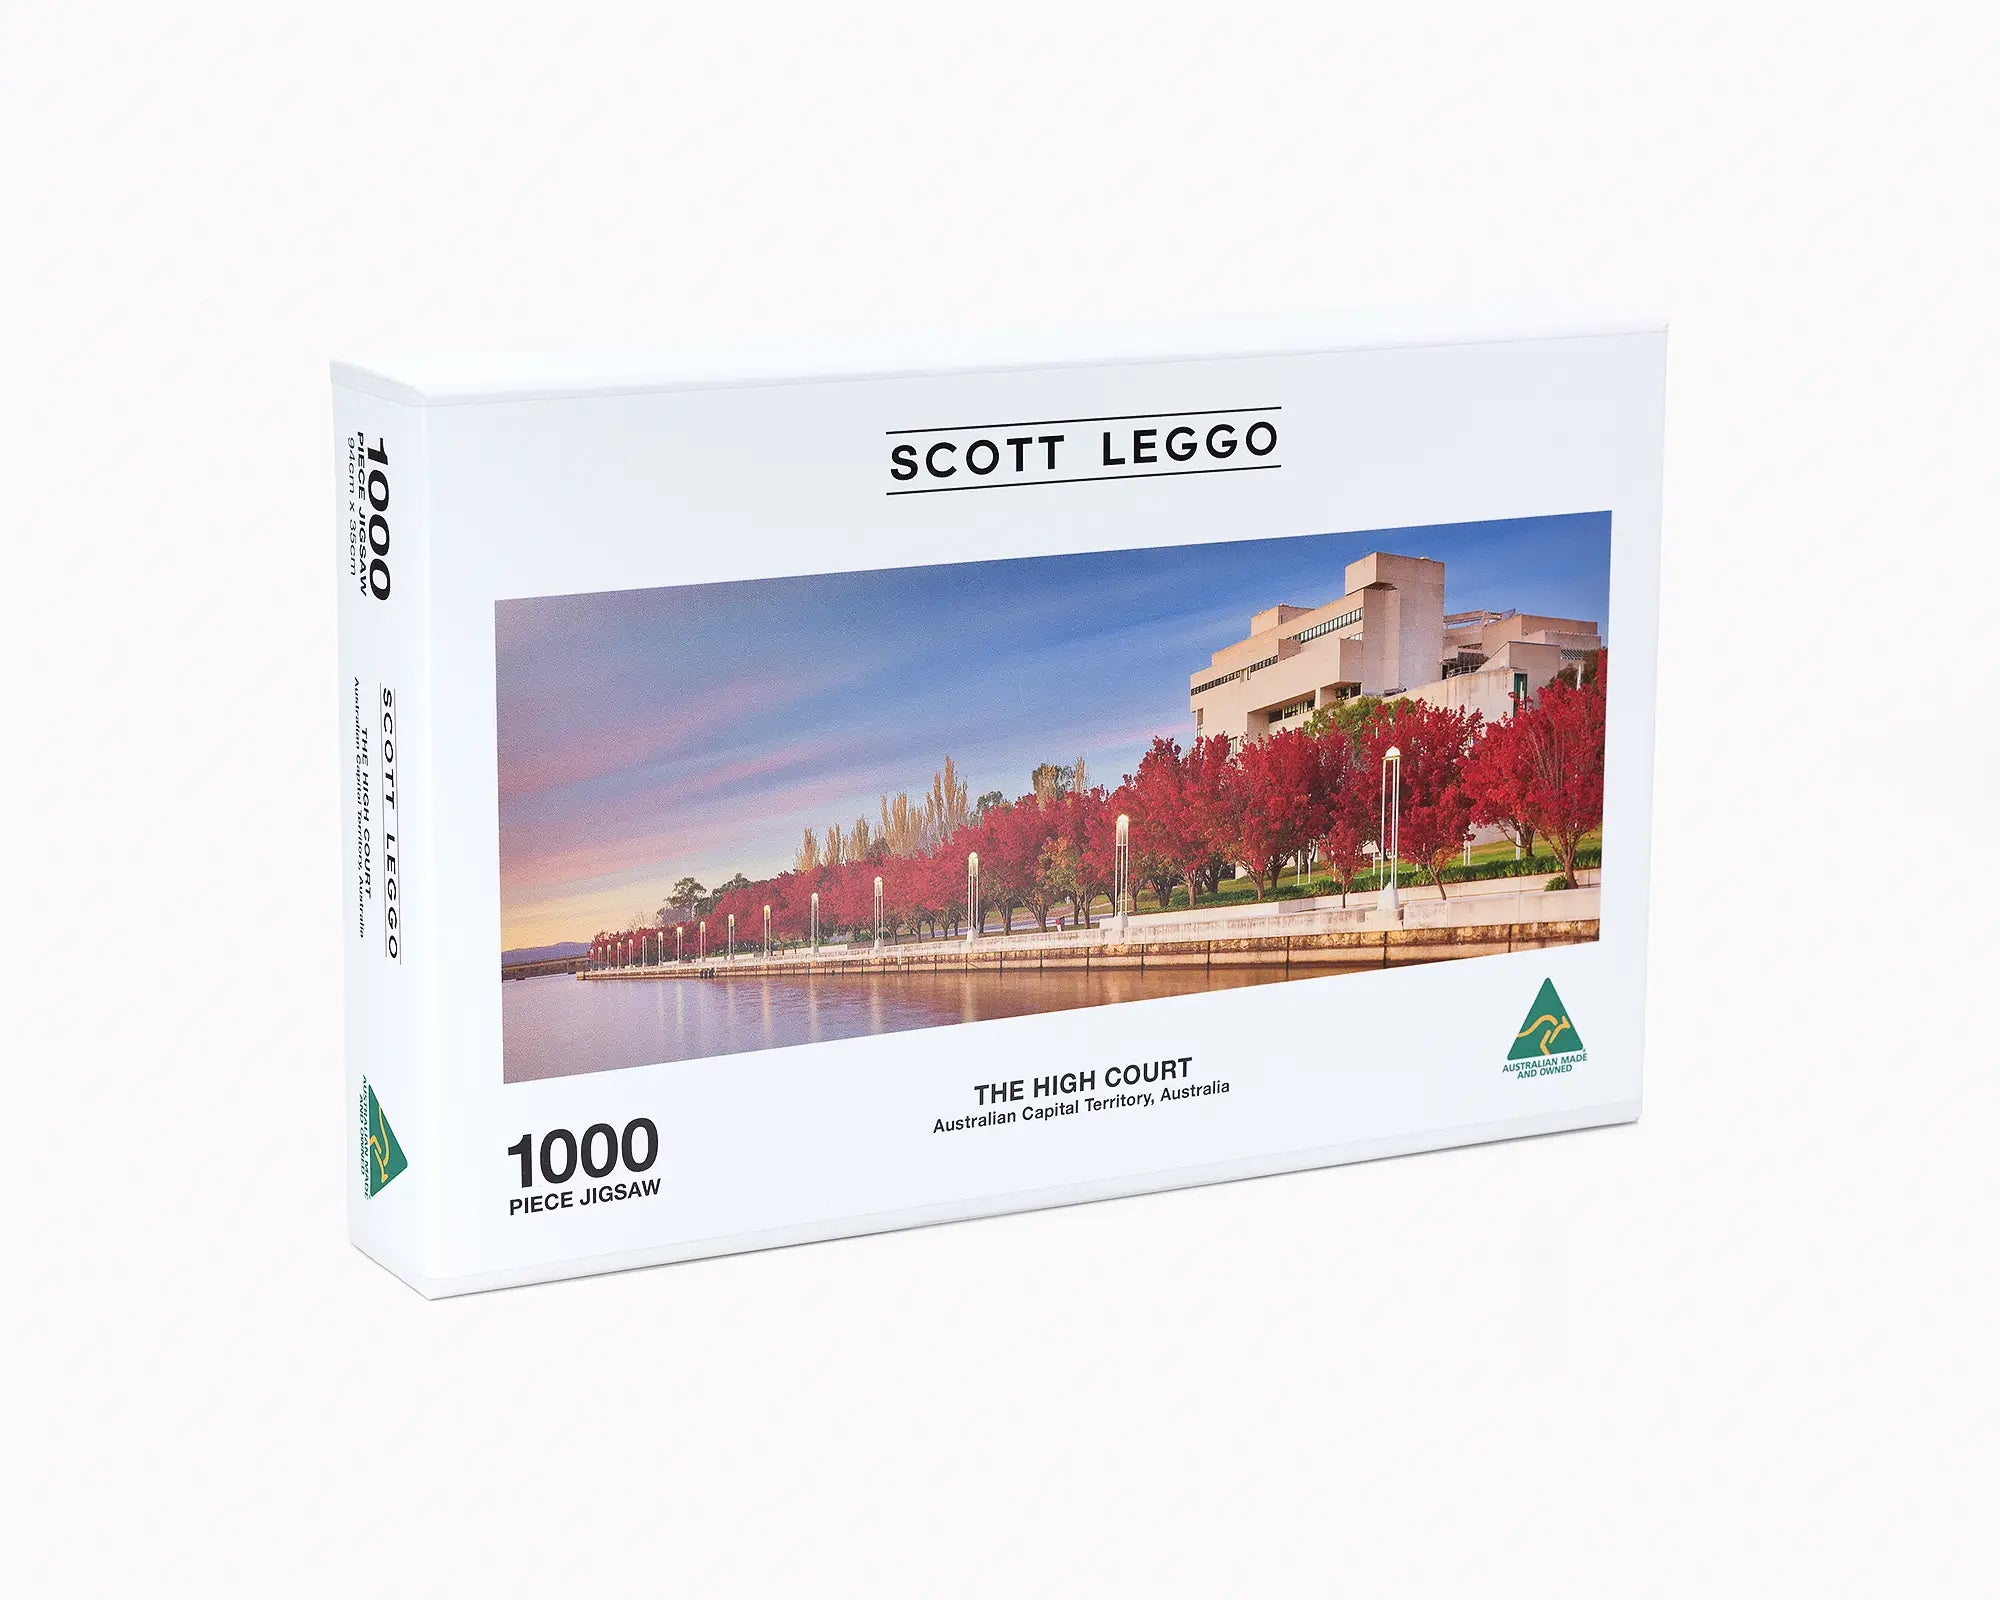 The HIgh Court 1000 piece jigsaw puzzle box.